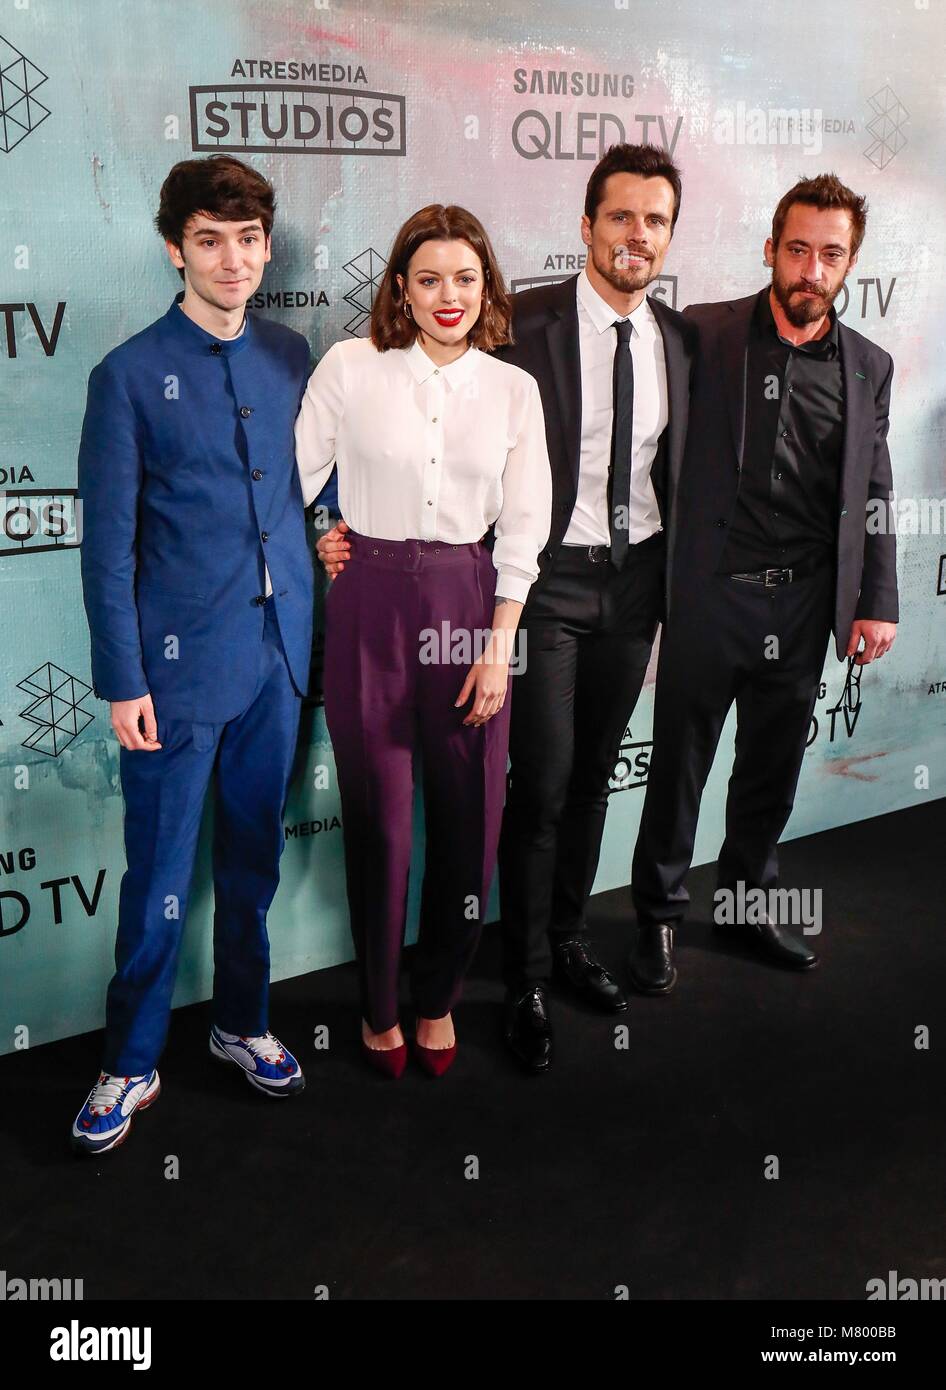 Madrid, Spain. 13th March, 2018. Cuerpo de Elite TV Show attends during  A3Media Studios Party, on Teatro Barcelo, Madrid, Spain, at March 13th  2018. Photo: Oscar J. Barroso / AFP7 Cordon Press